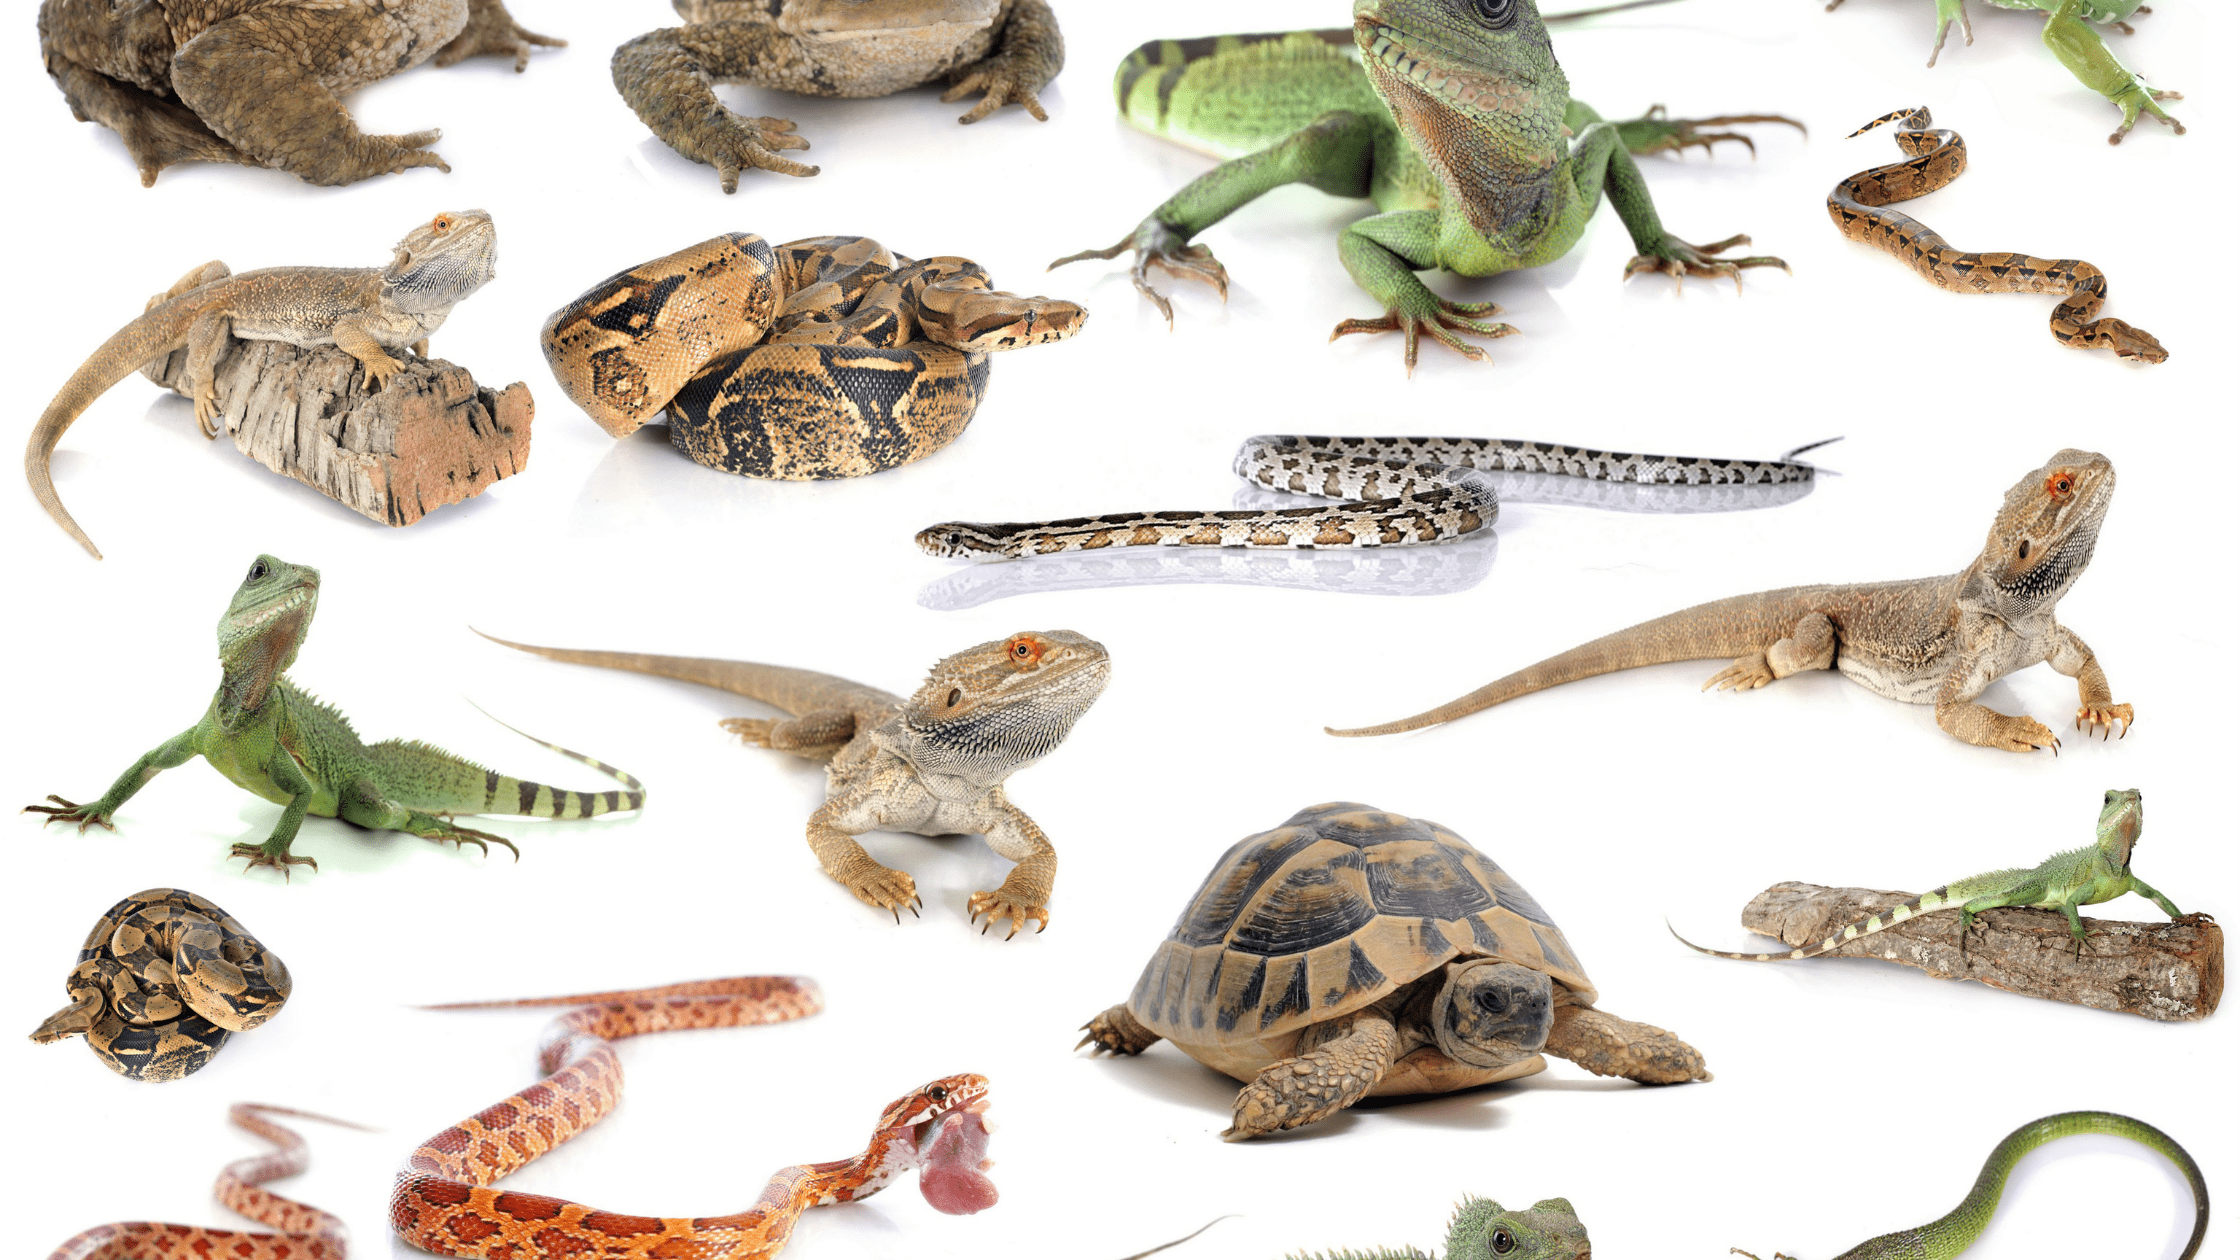 The Pros and Cons of Reptiles as Pets - Cat Sitter Toronto Inc.